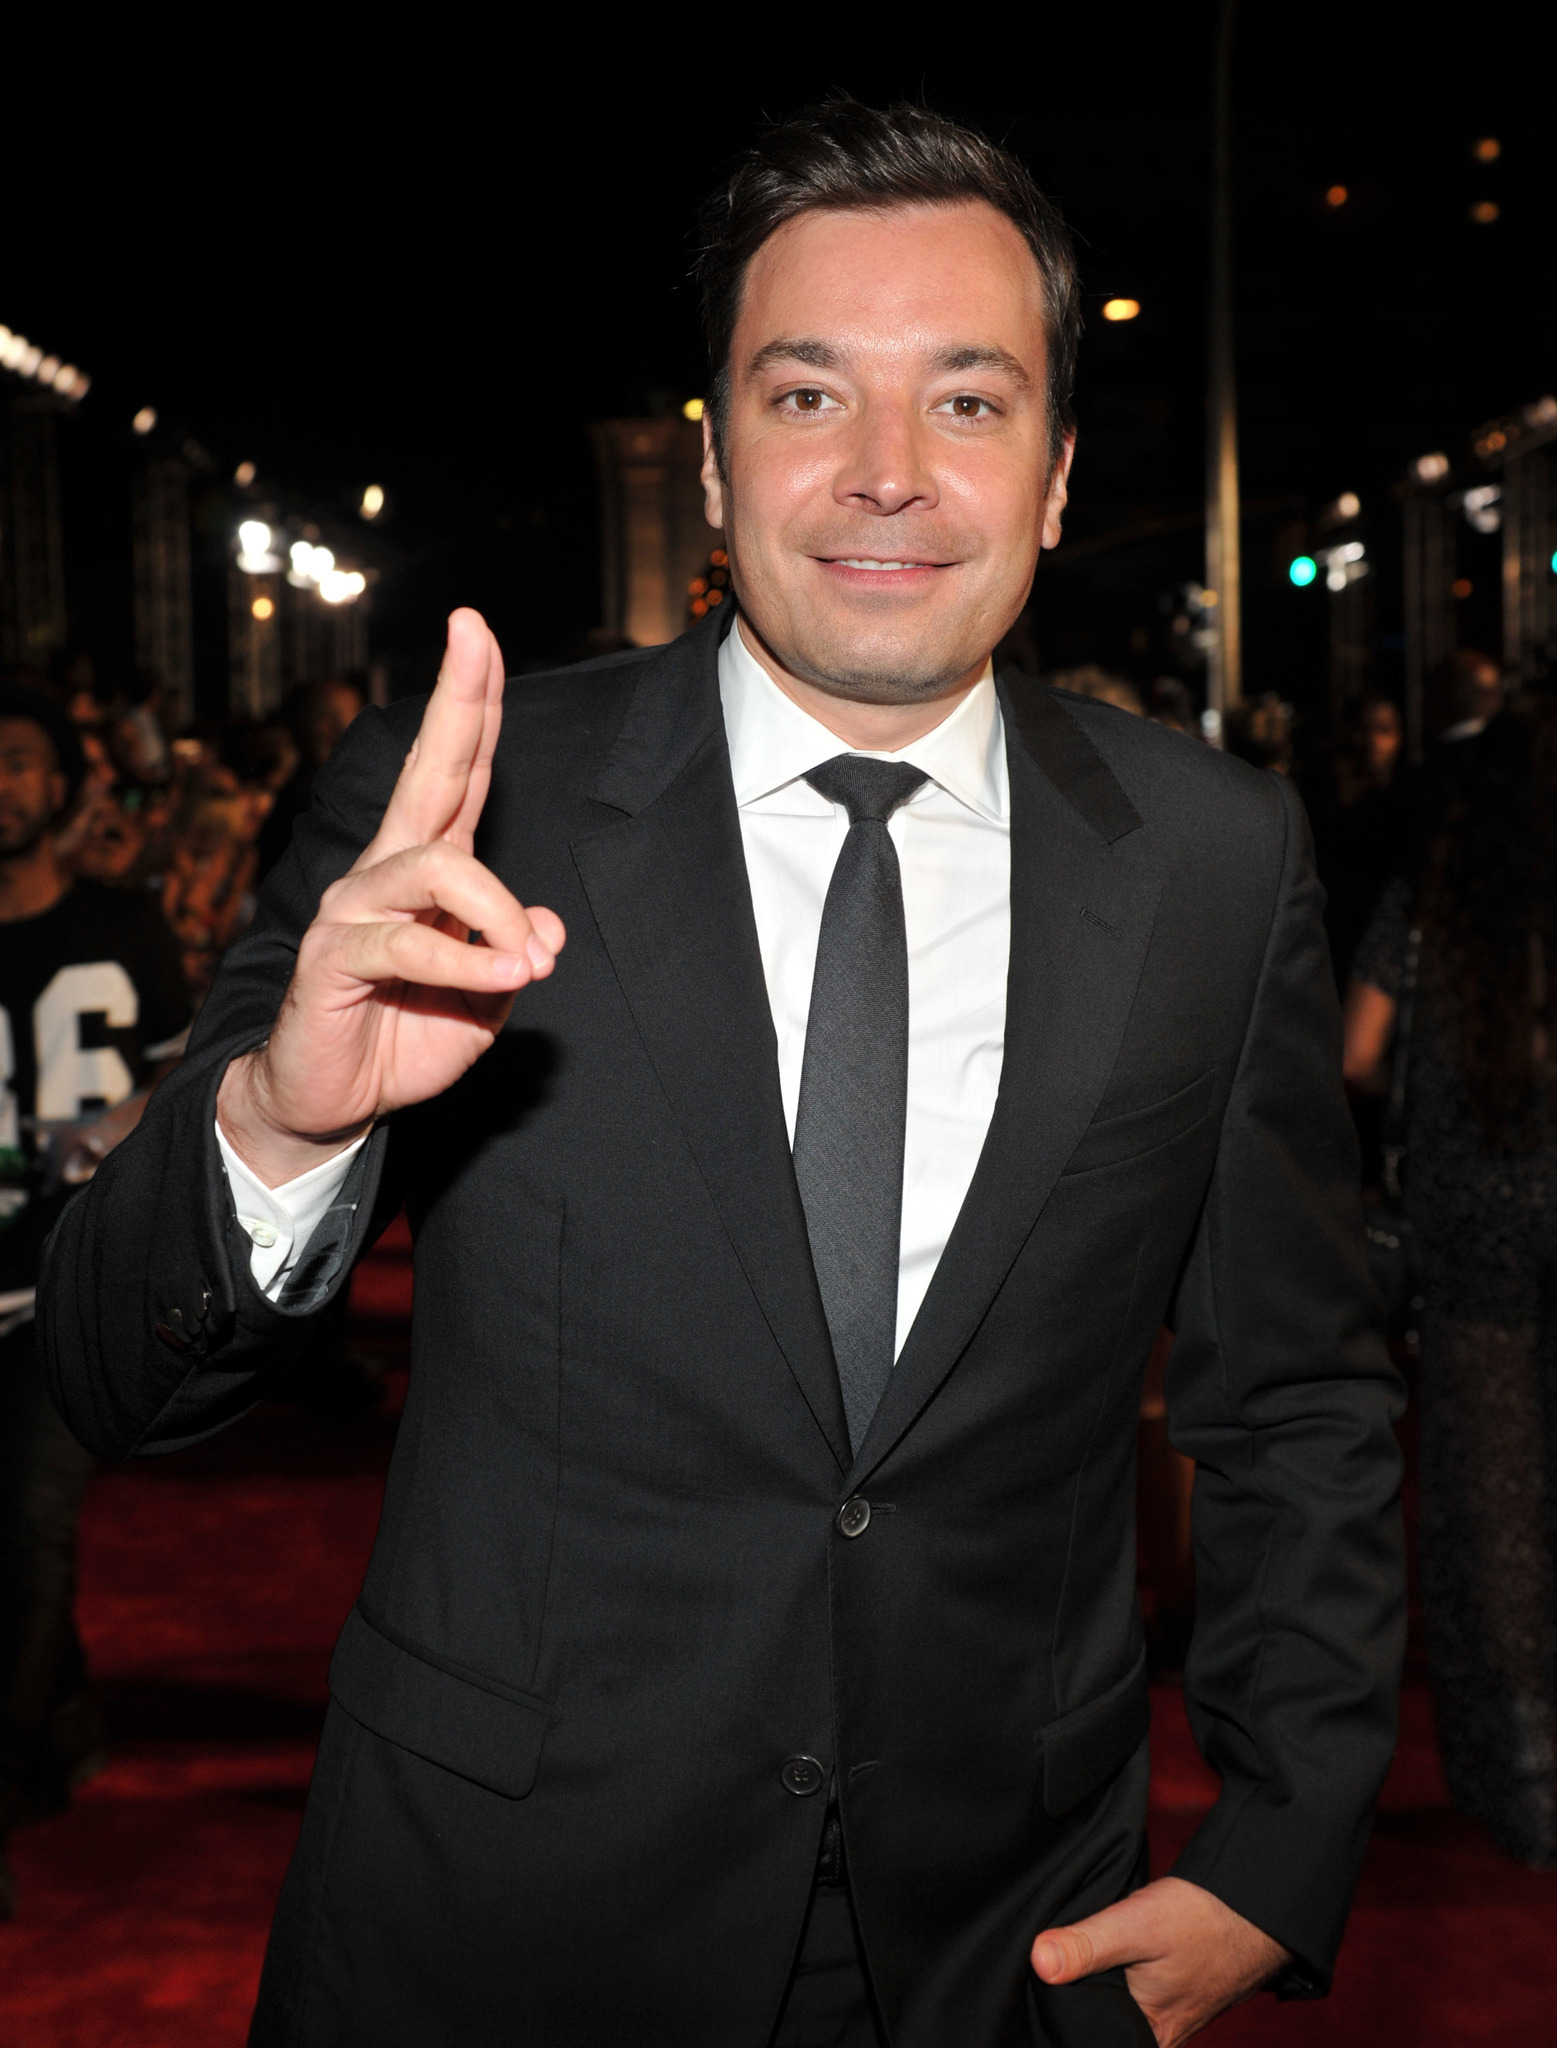 Jimmy Fallon at event of 2013 MTV Video Music Awards (2013)